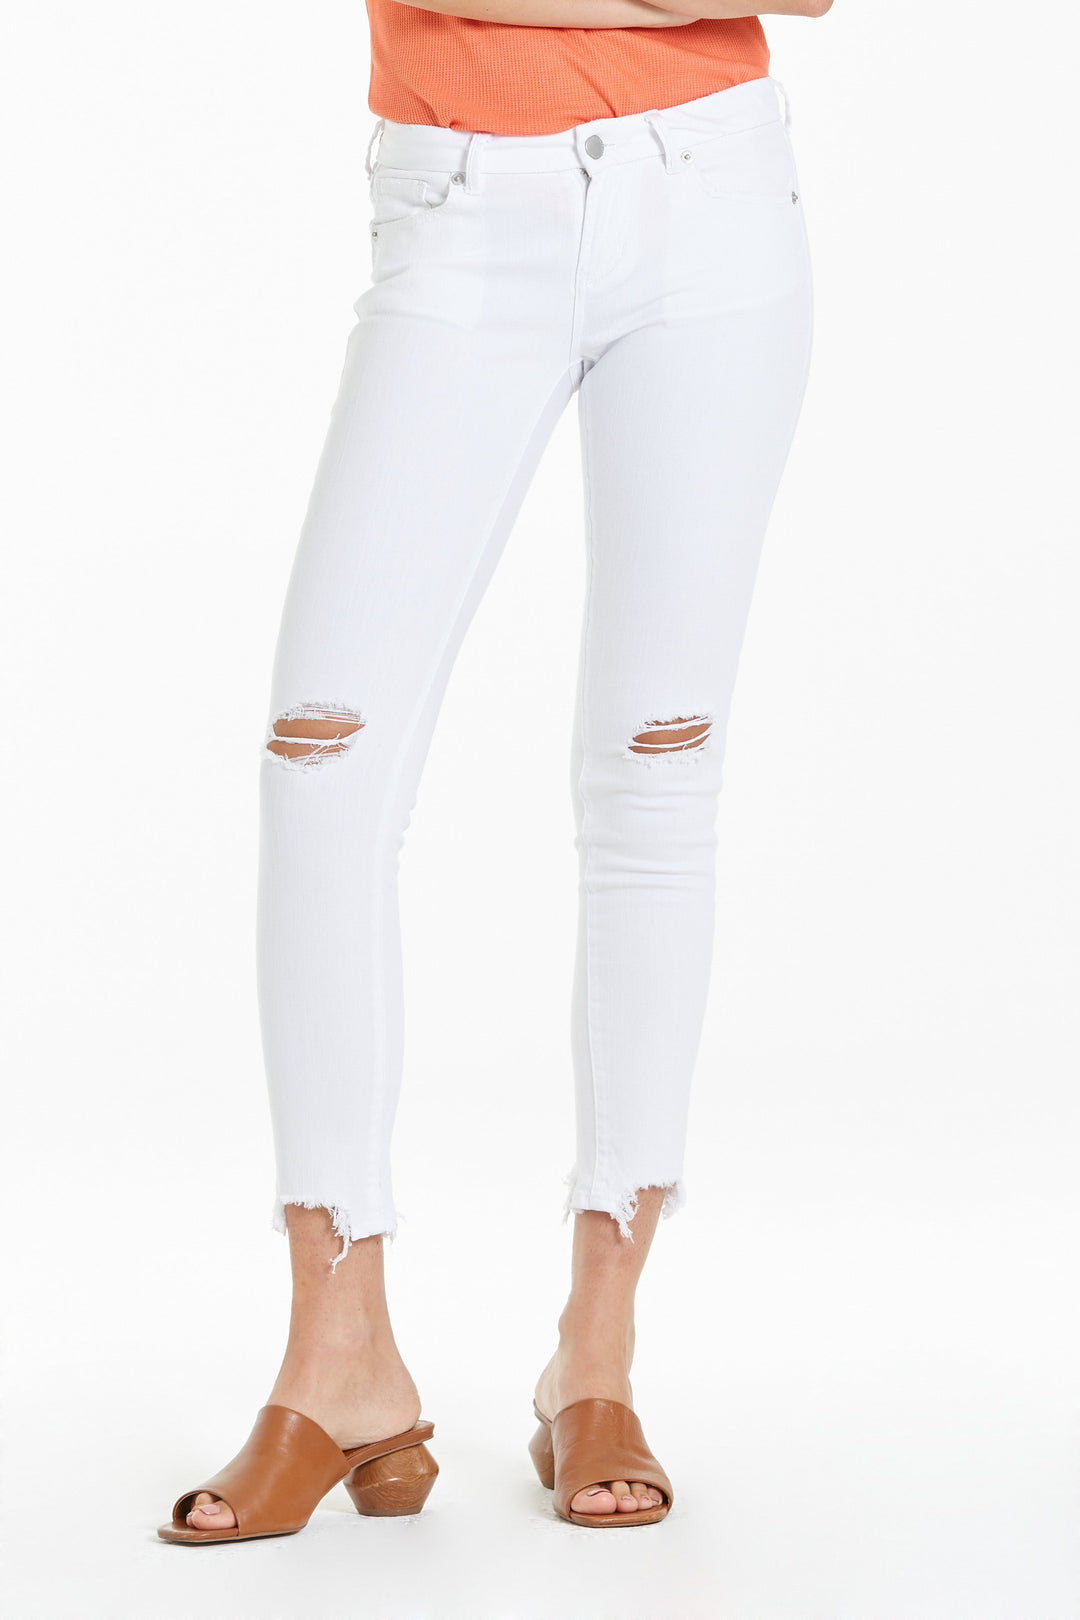 image of a female model wearing a JOYRICH MID RISE ANKLE SKINNY JEANS OPTIC WHITE JEANS